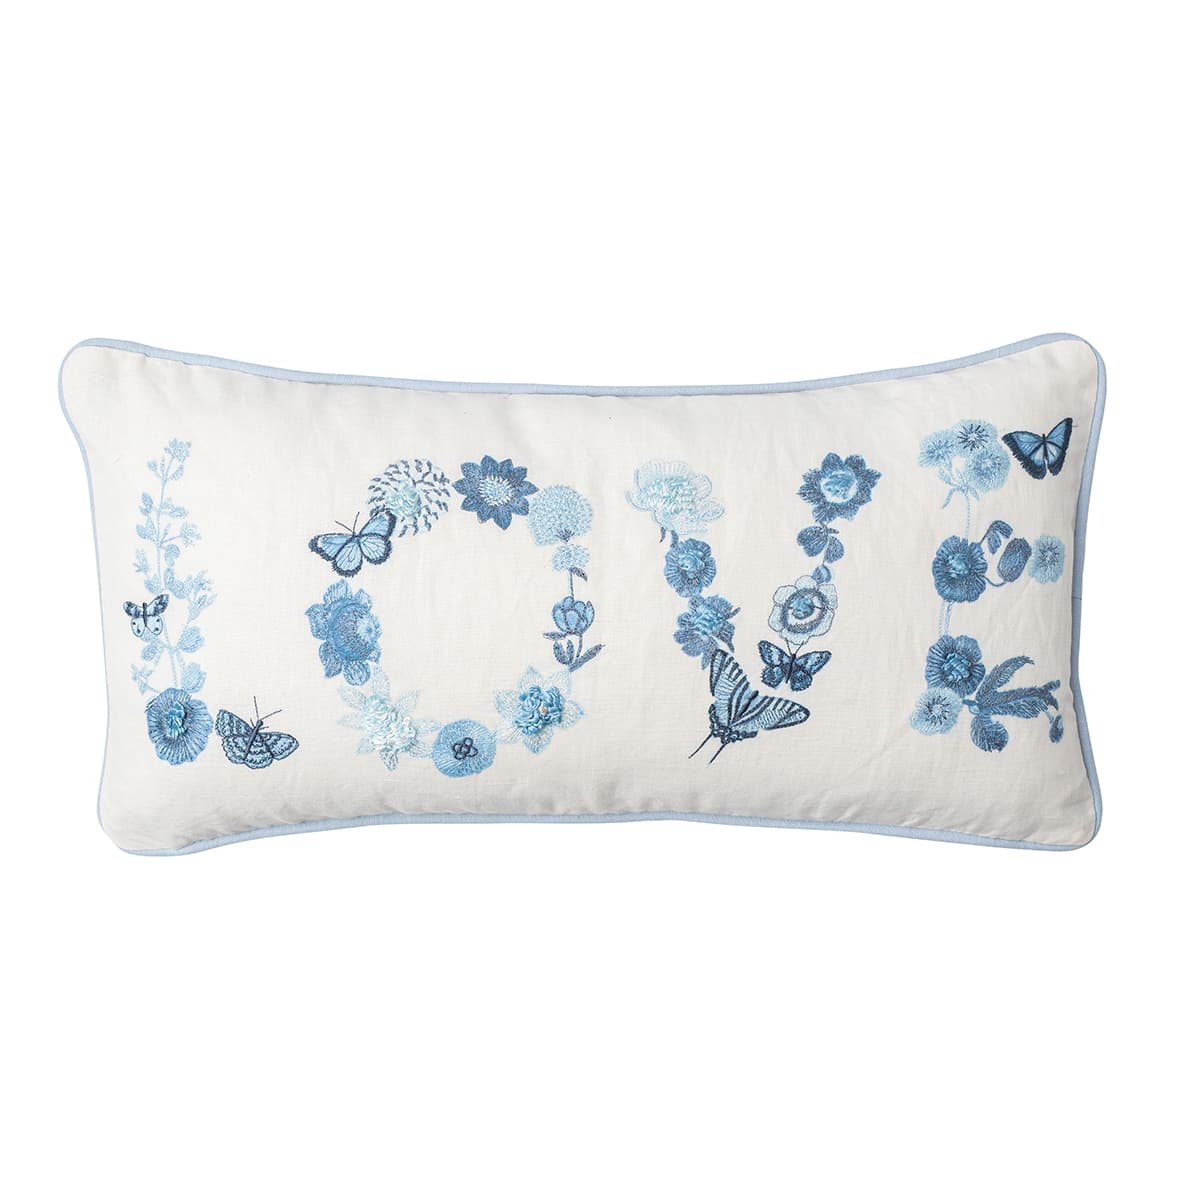 Featuring intricate blue floral embroidery spelling out one of our favorite sentiments LOVE on one side, and our Tartan Chambray on the reverse, this pillow will make a beautiful statement in any room you place it.